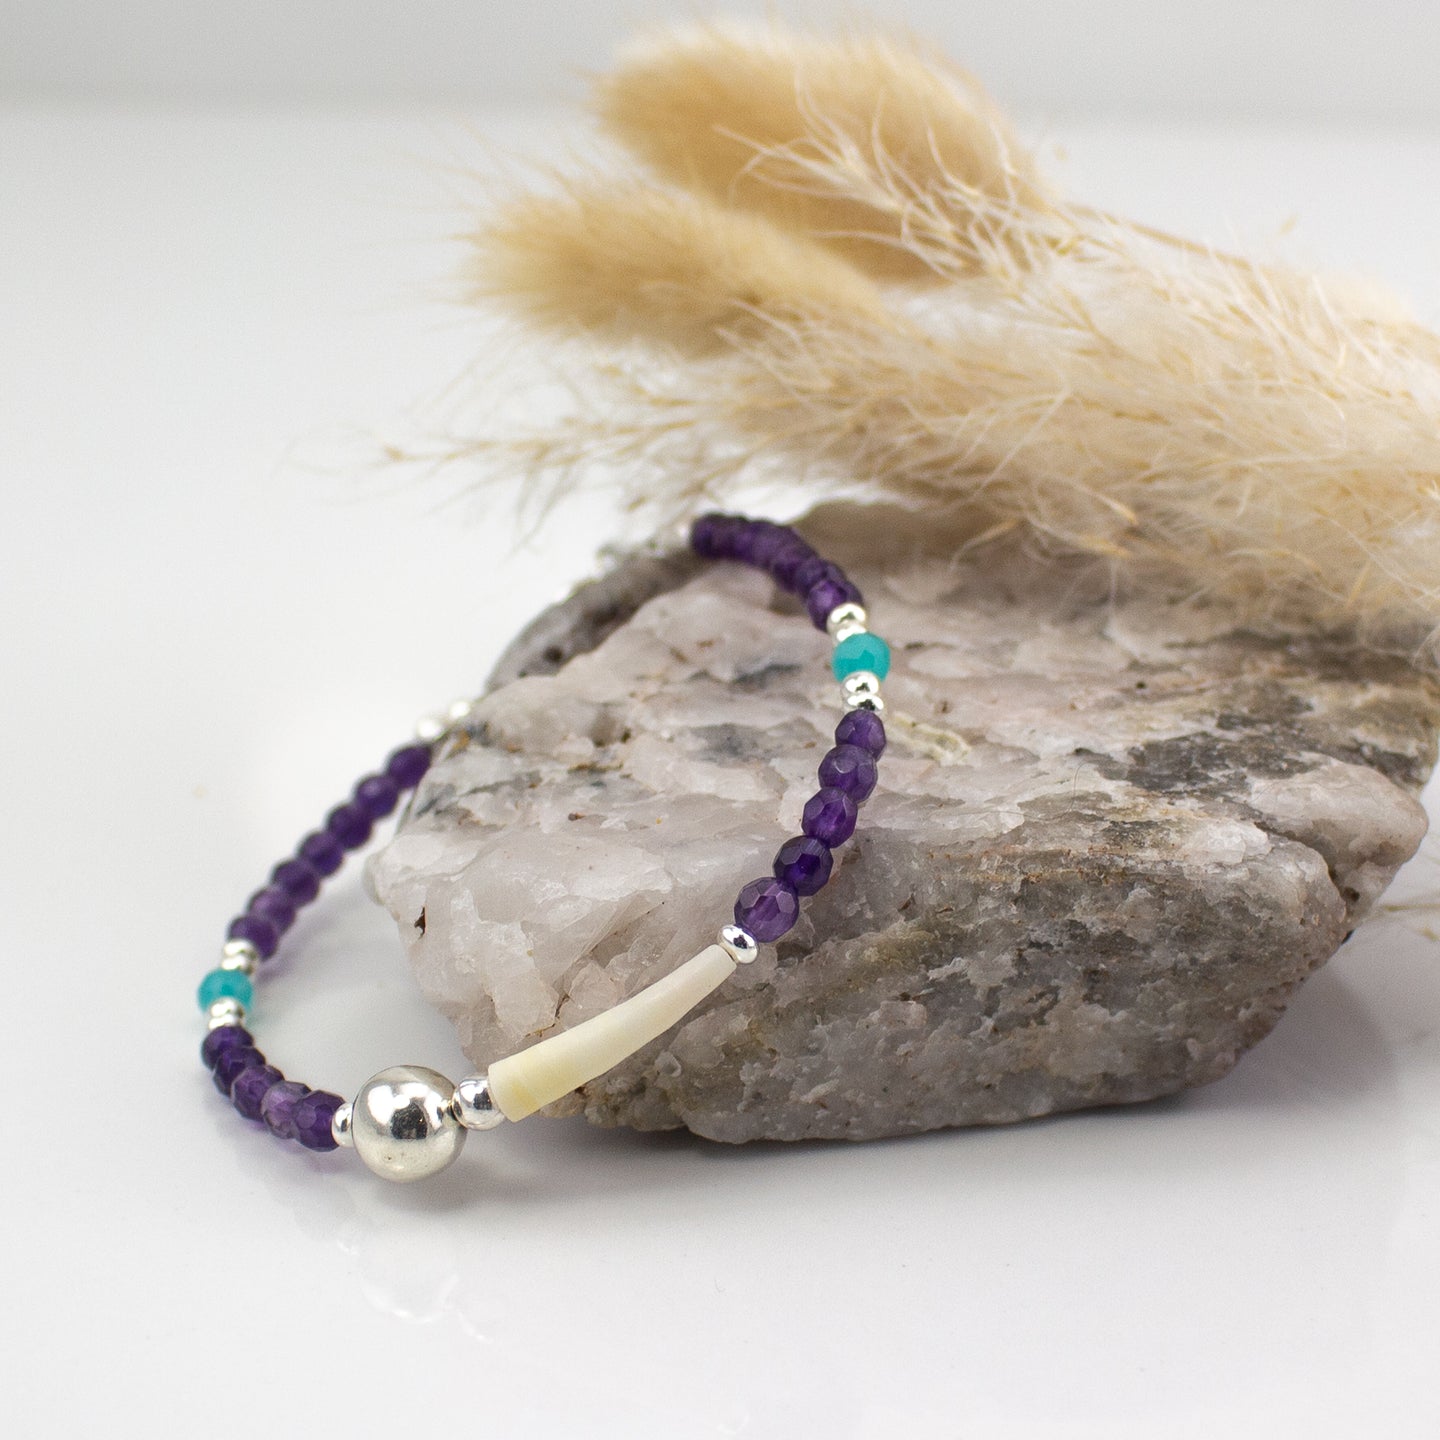 Natural tusk shell bracelet with faceted purple amethyst & pale green amazonite stones with sterling silver.  This bracelet is made using local tusk shells from my local beaches and combined with semi precious stones to create a unique piece of Irish jewellery.  It is 8 inches in length and comes presented in a pretty eco friendly gift box for safe keeping.  Designed and Handmade in Dingle